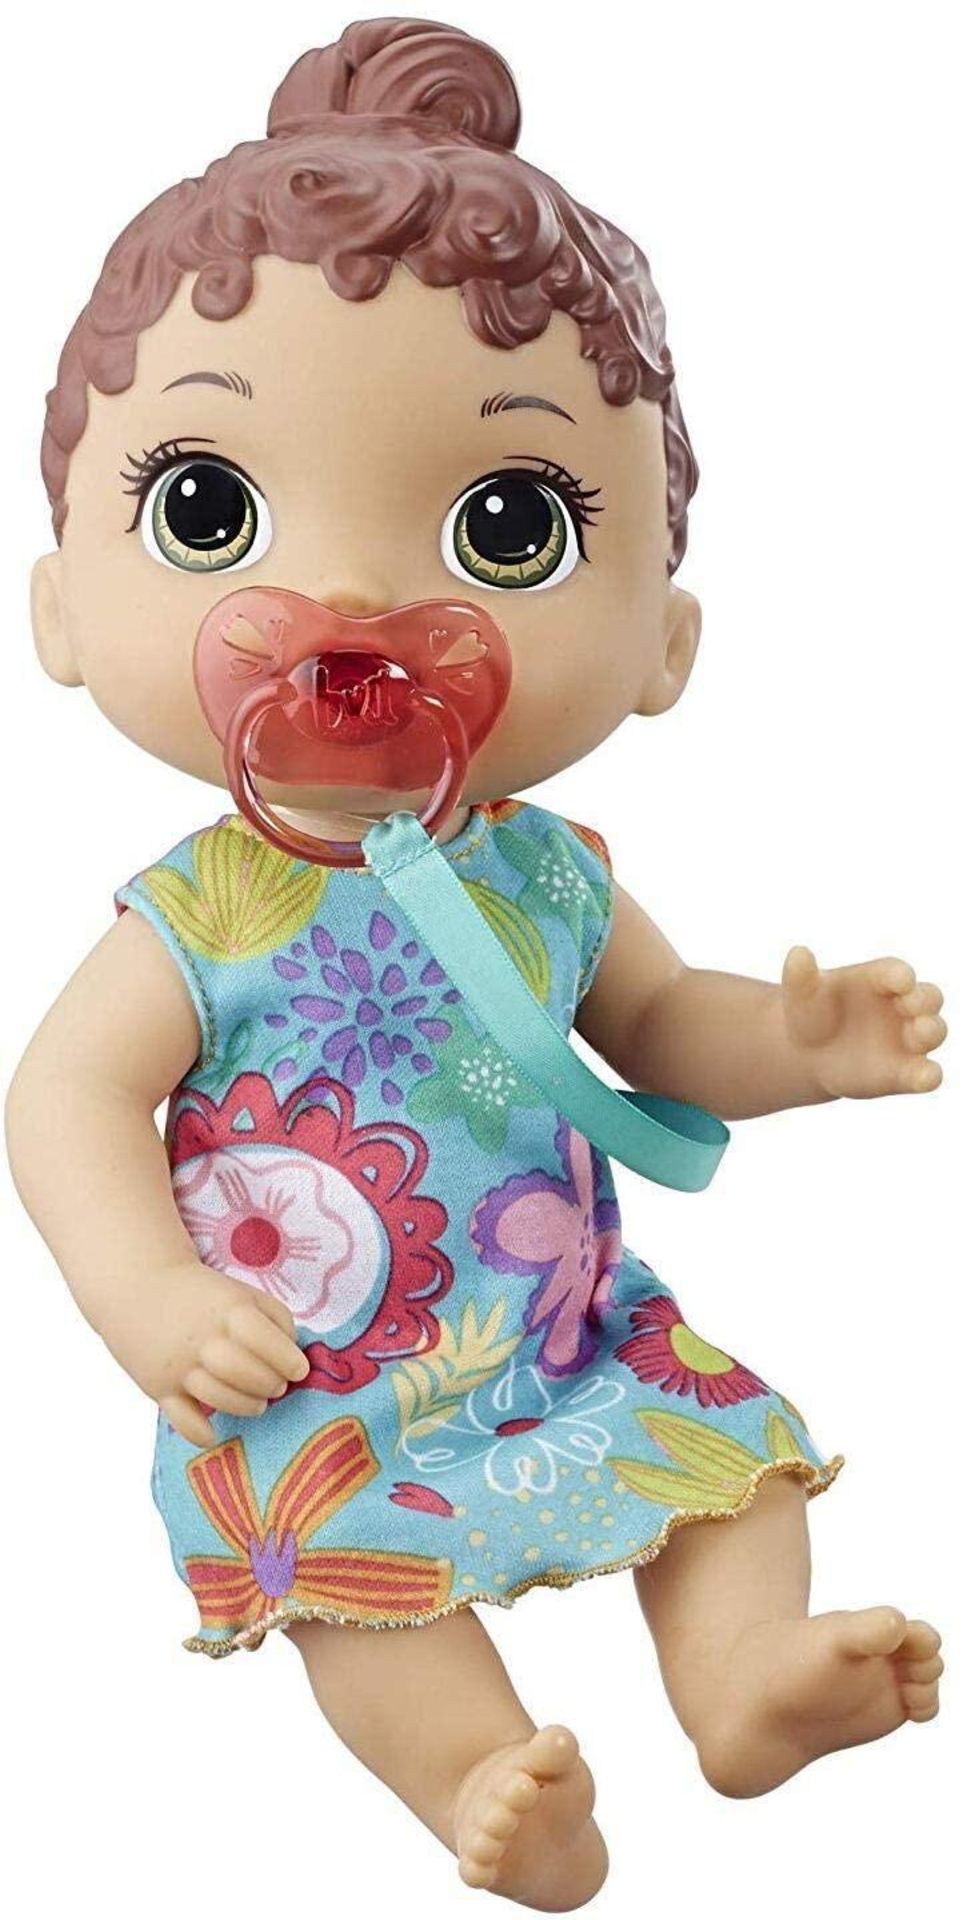 Baby Alive Baby Lil Sounds: Interactive Brown Hair Baby Doll for Girls and Boys Ages 3 and Up